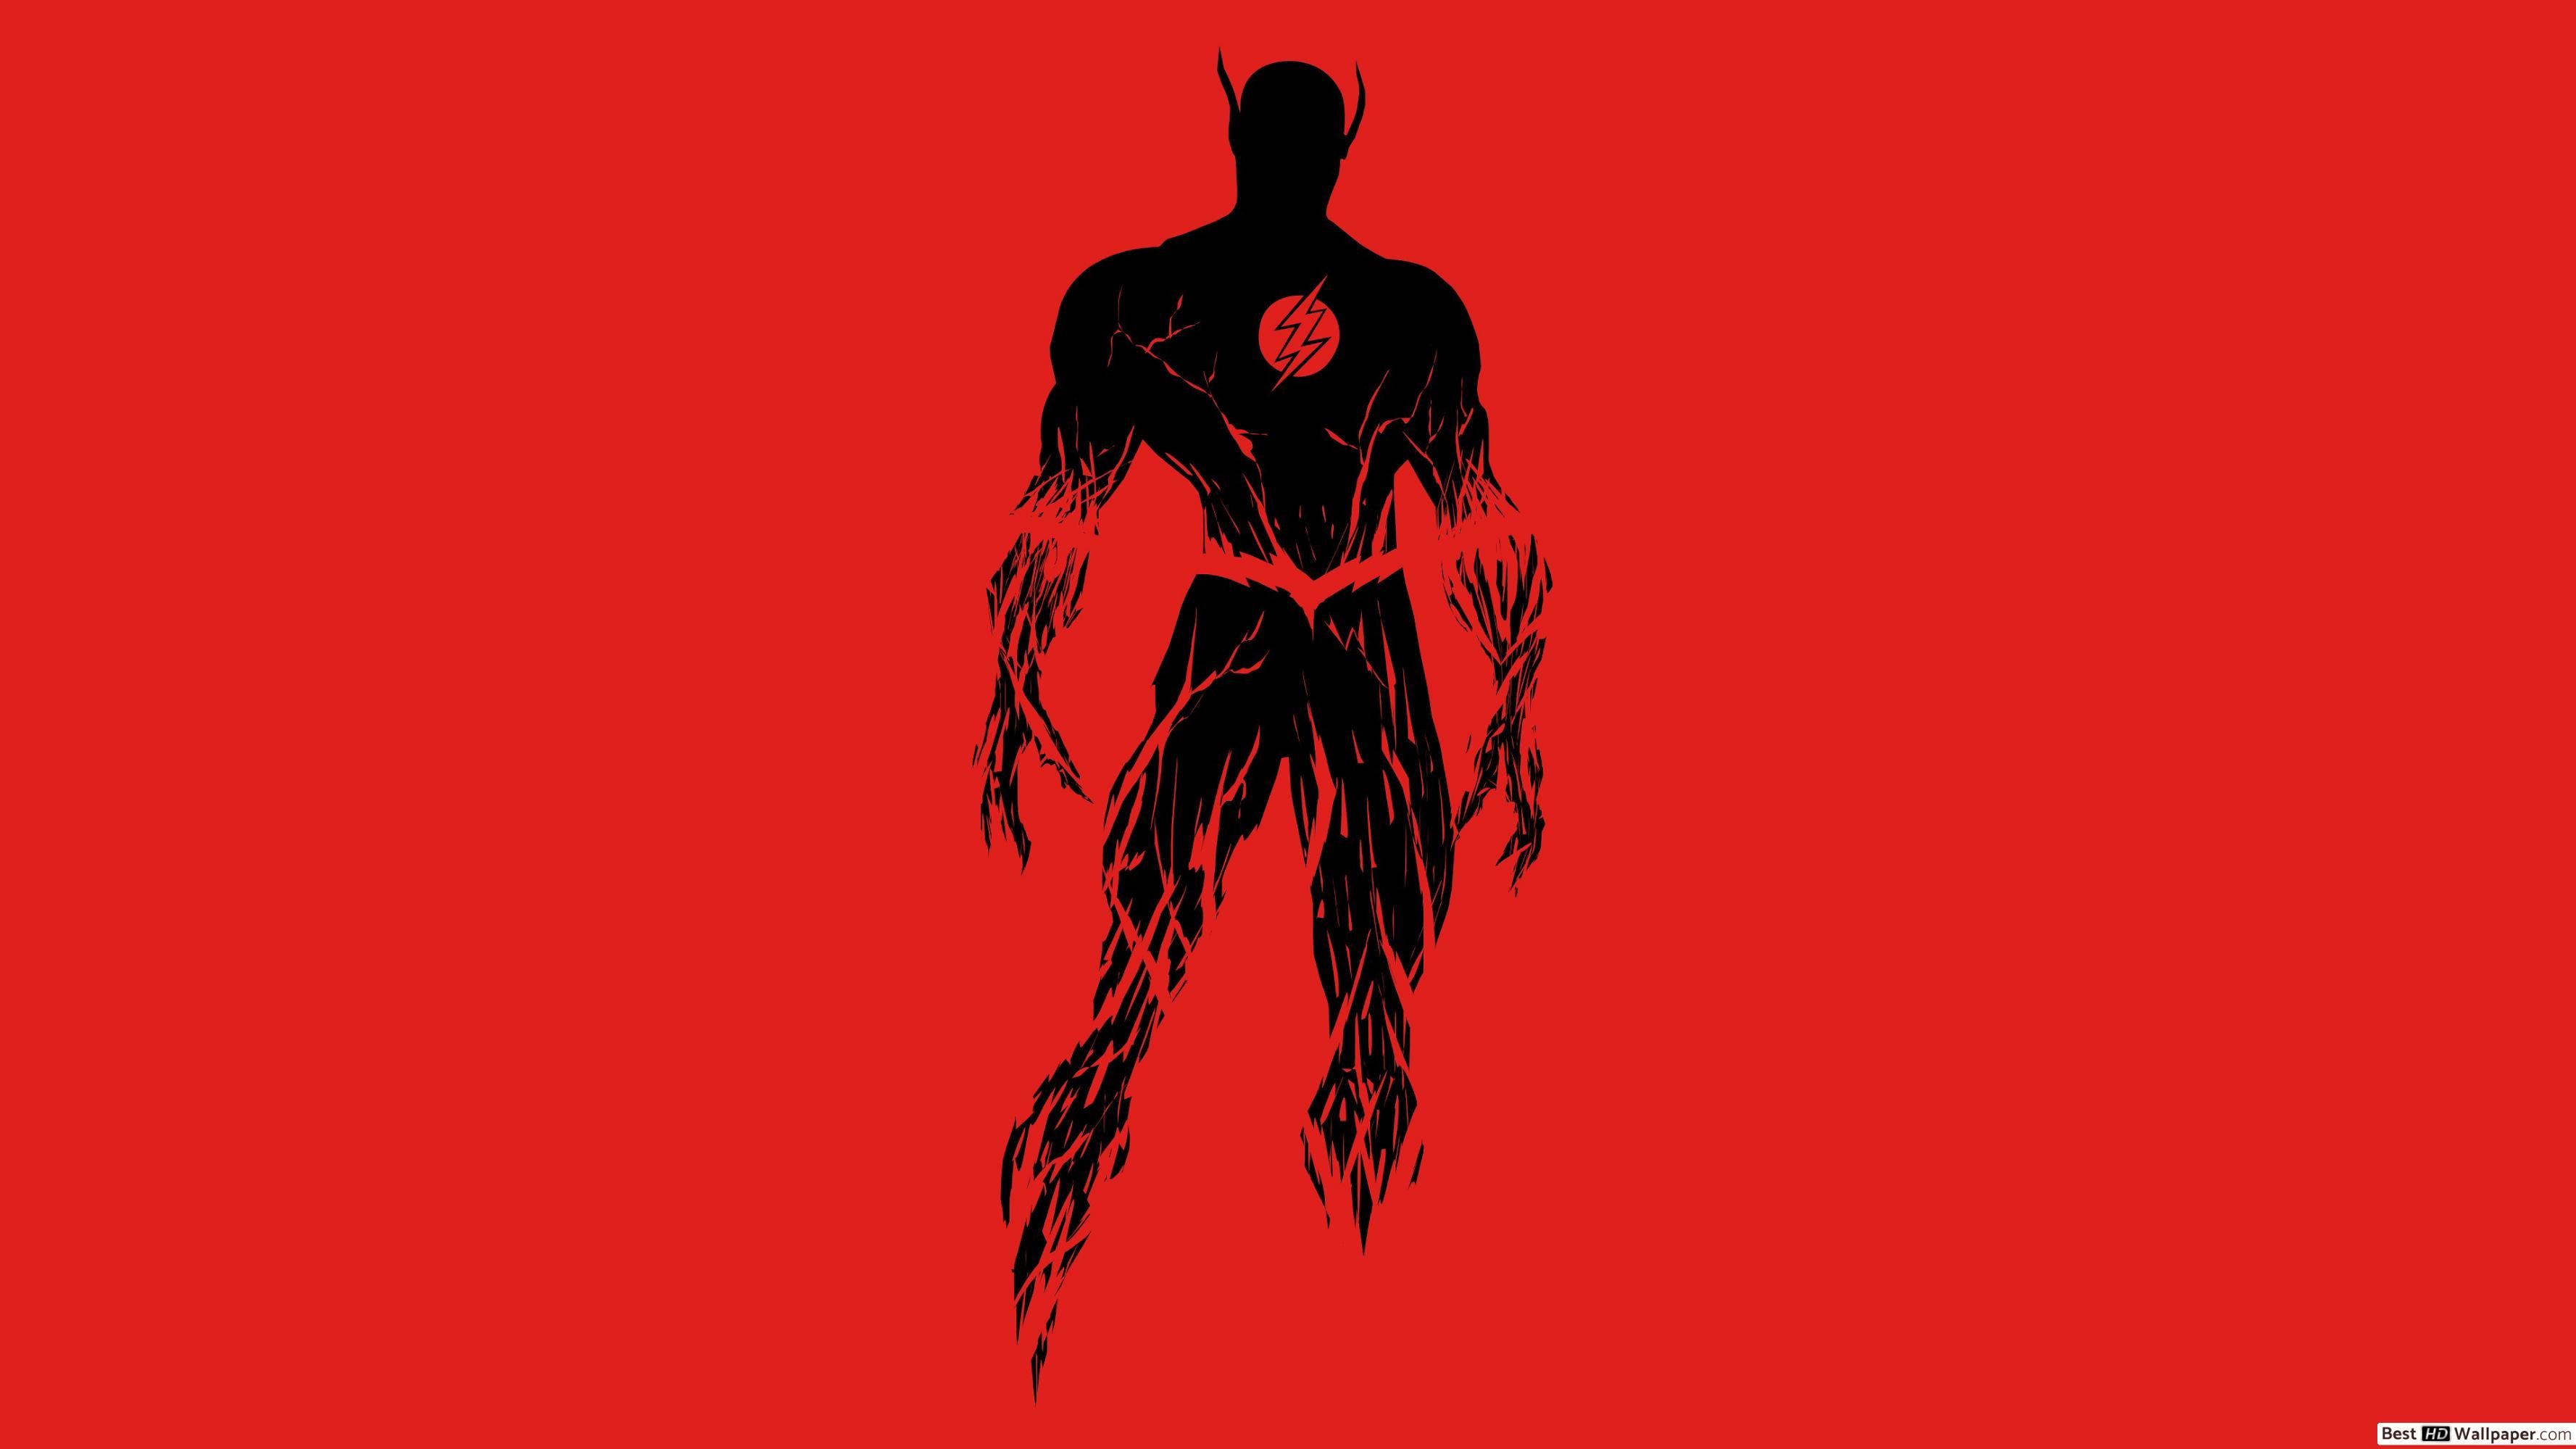 The Flash black and red minimalist HD wallpaper download